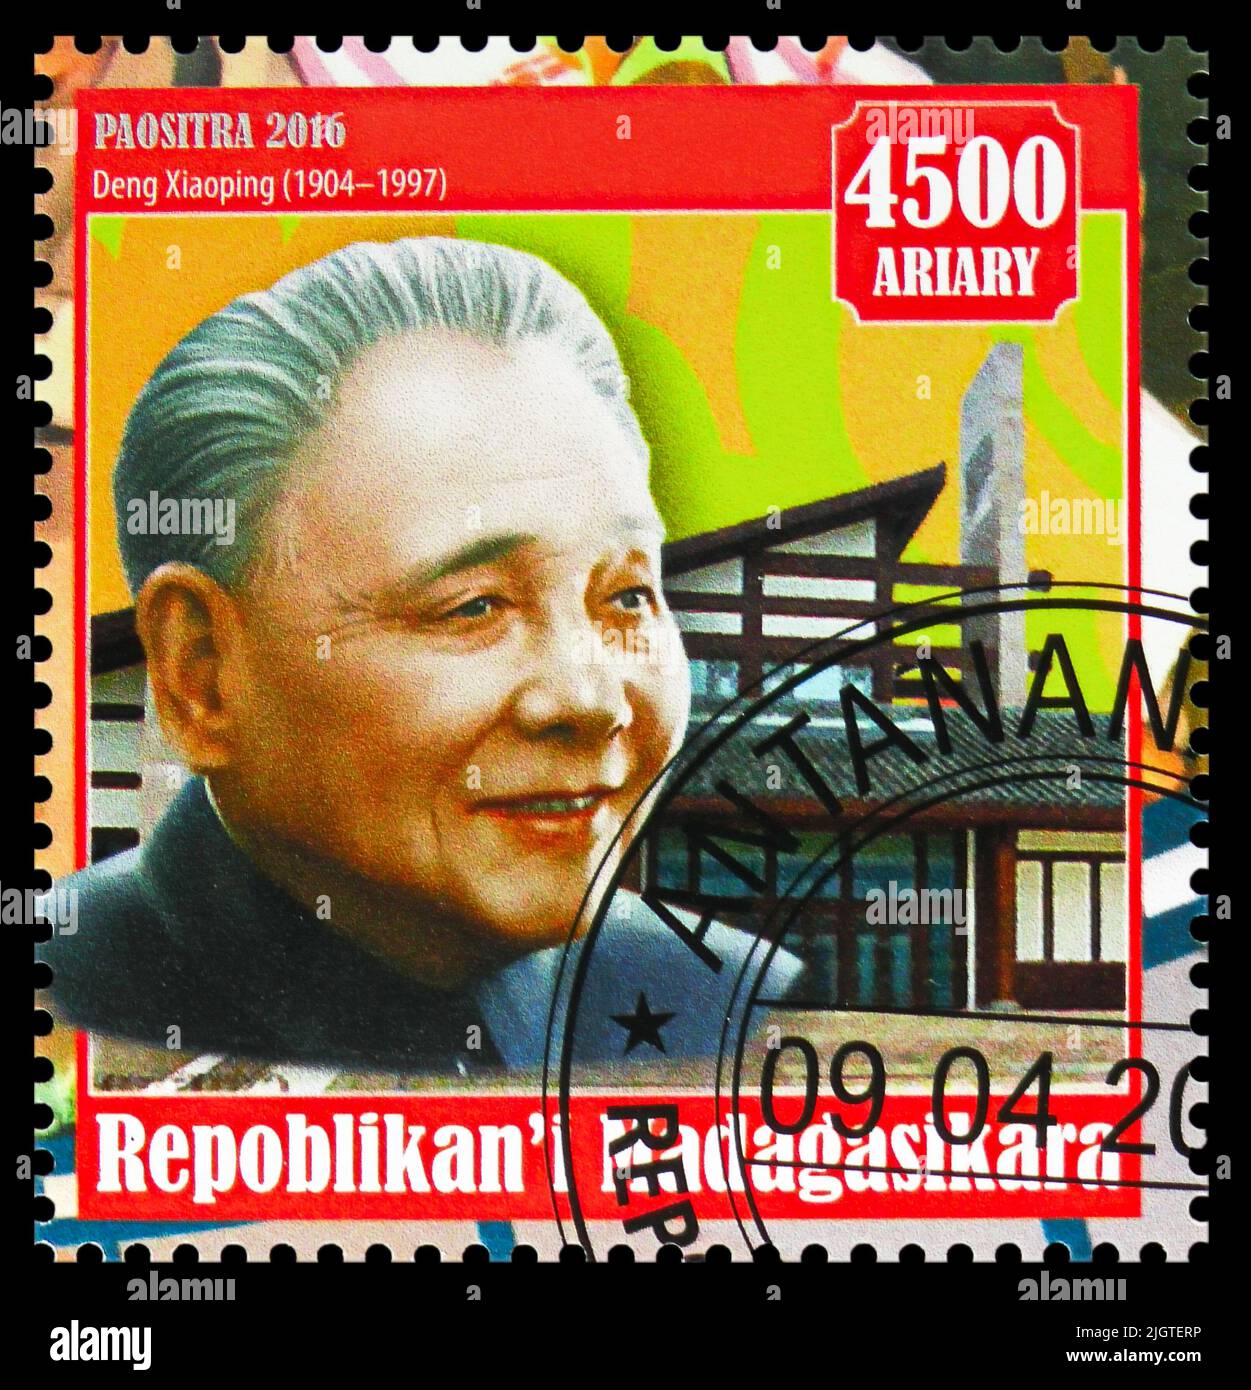 MOSCOW, RUSSIA - JUNE 17, 2022: Postage stamp printed in Madagascar shows Deng Xiaoping, Leaders of Republic of China serie, circa 2016 Stock Photo